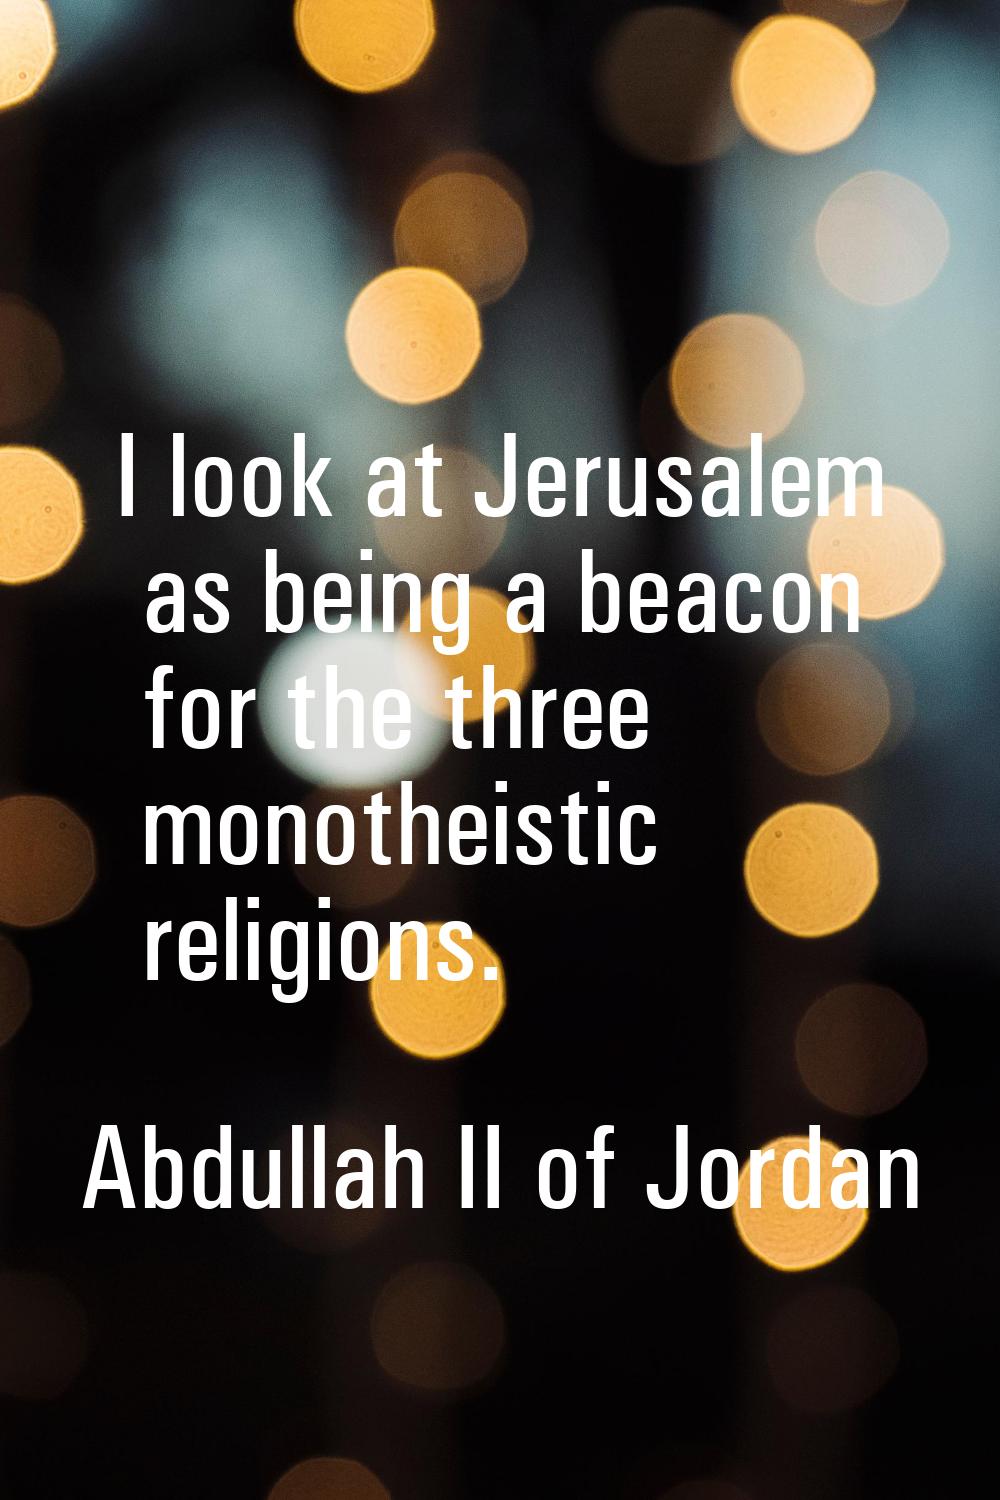 I look at Jerusalem as being a beacon for the three monotheistic religions.